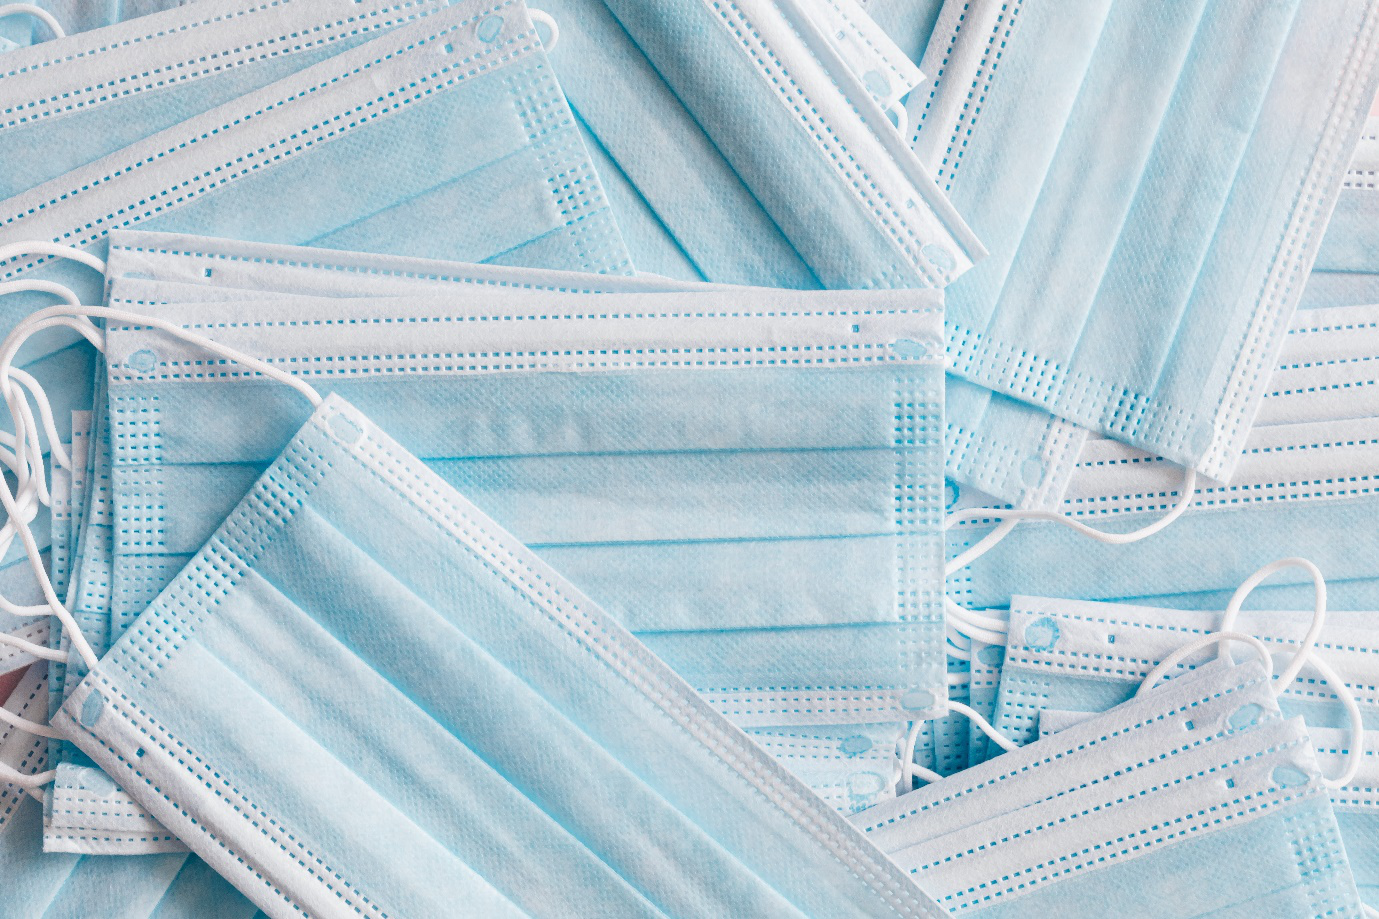 The Differences Between N95s, Surgical Masks, and Cloth Masks